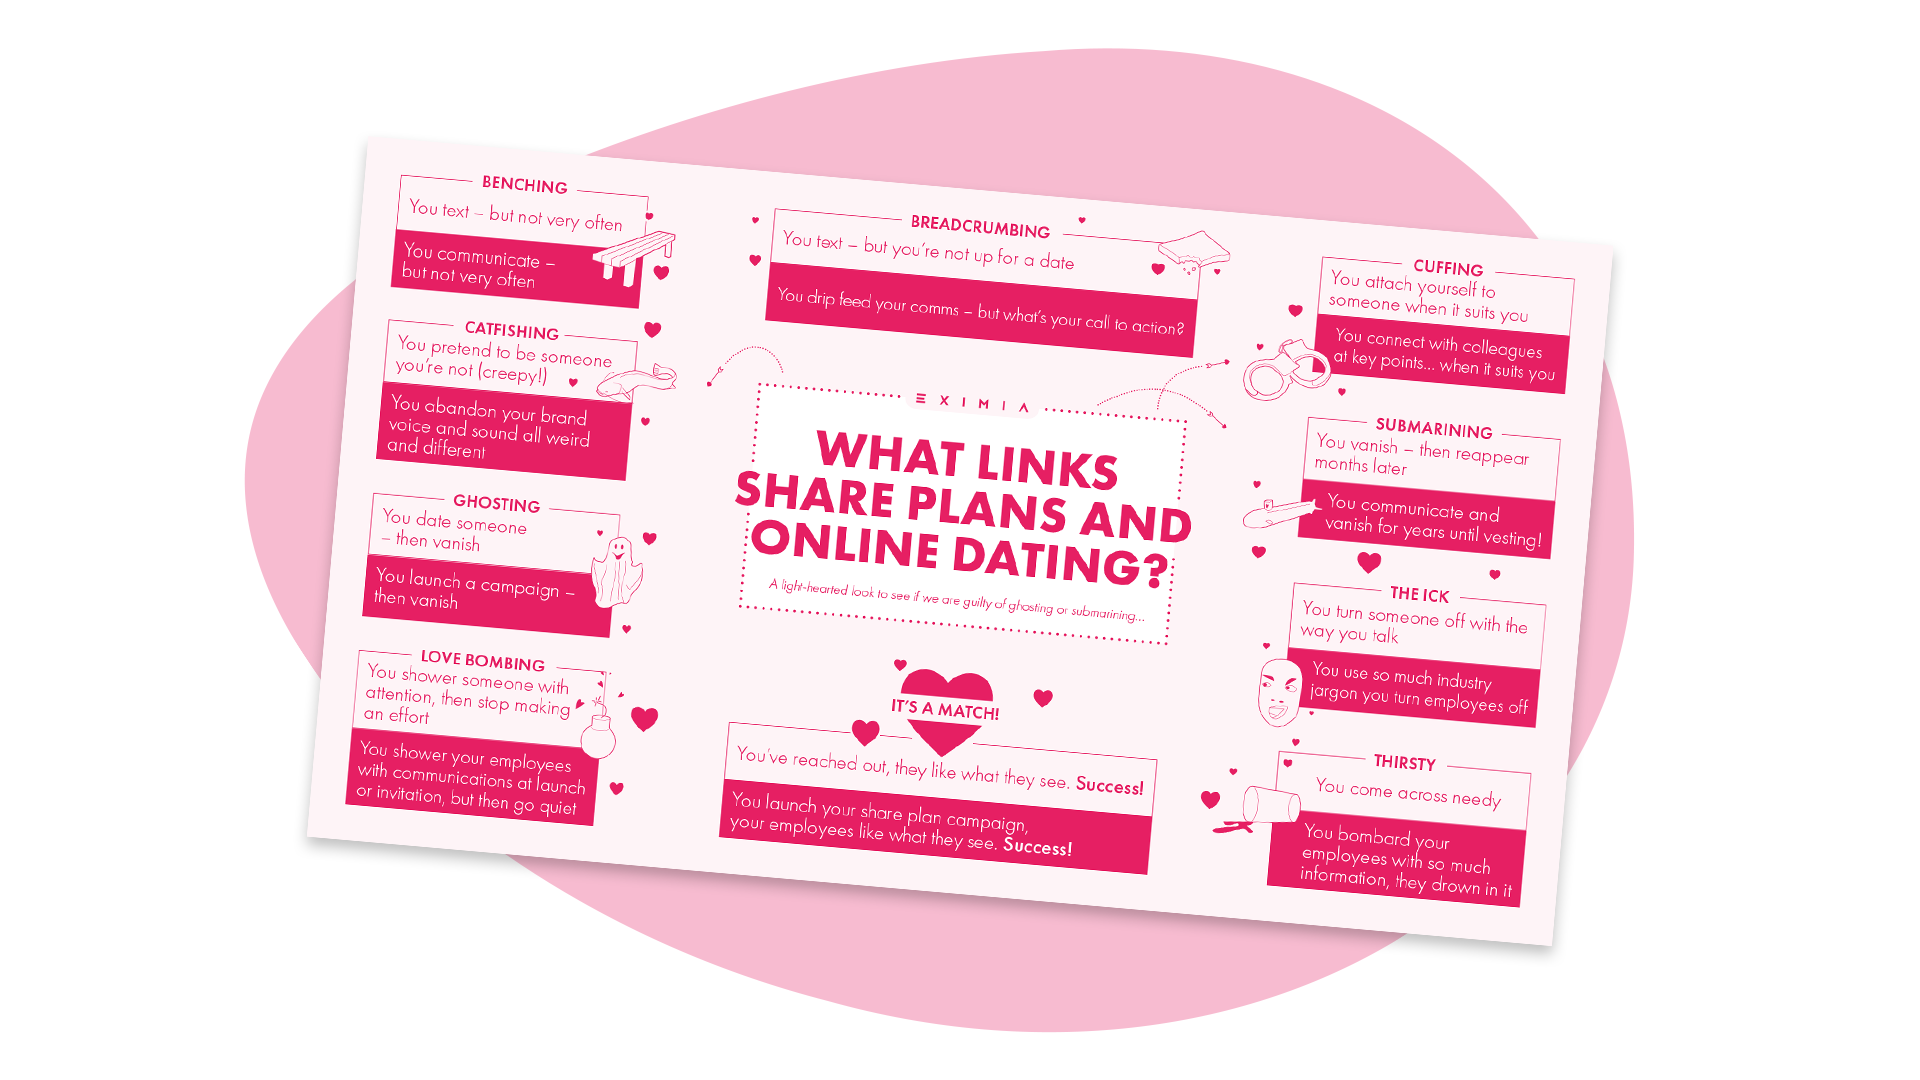 What links share plans and online dating